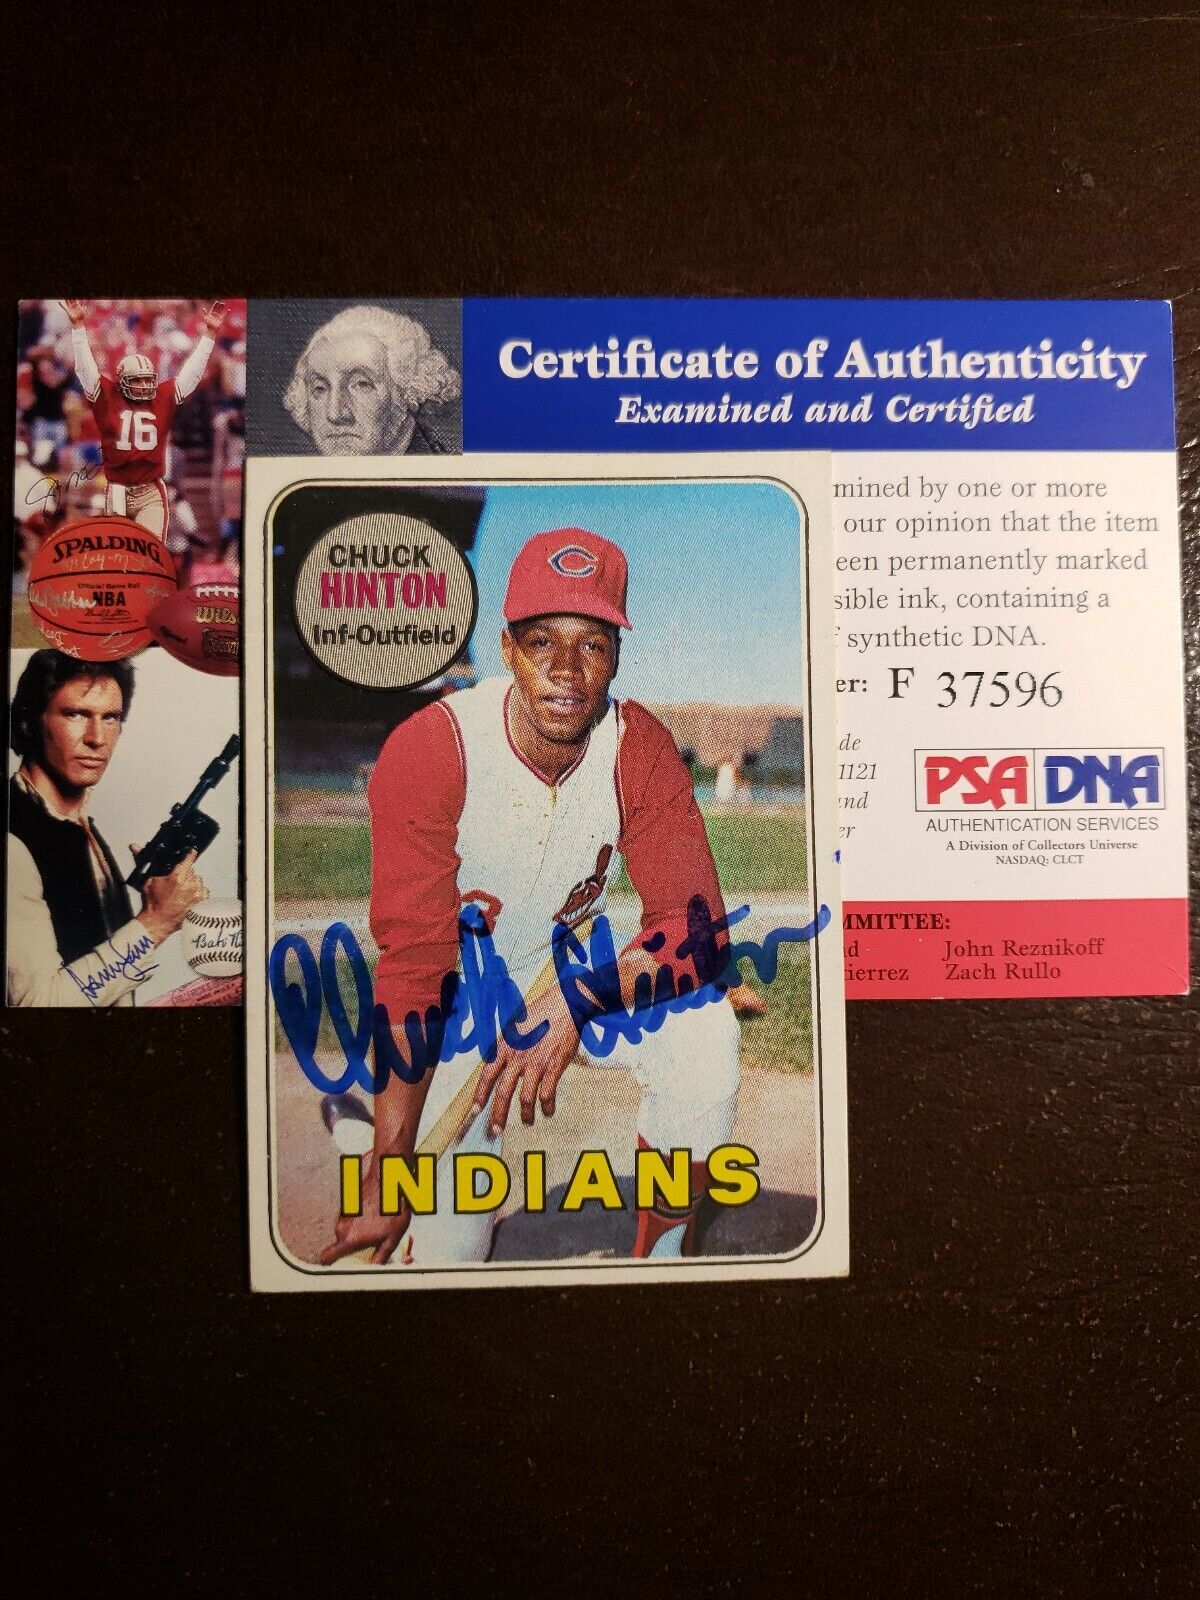 1969 Topps Chuck Hinton Auto Autograph Card Signed #644 Indians Angels PSA DNA